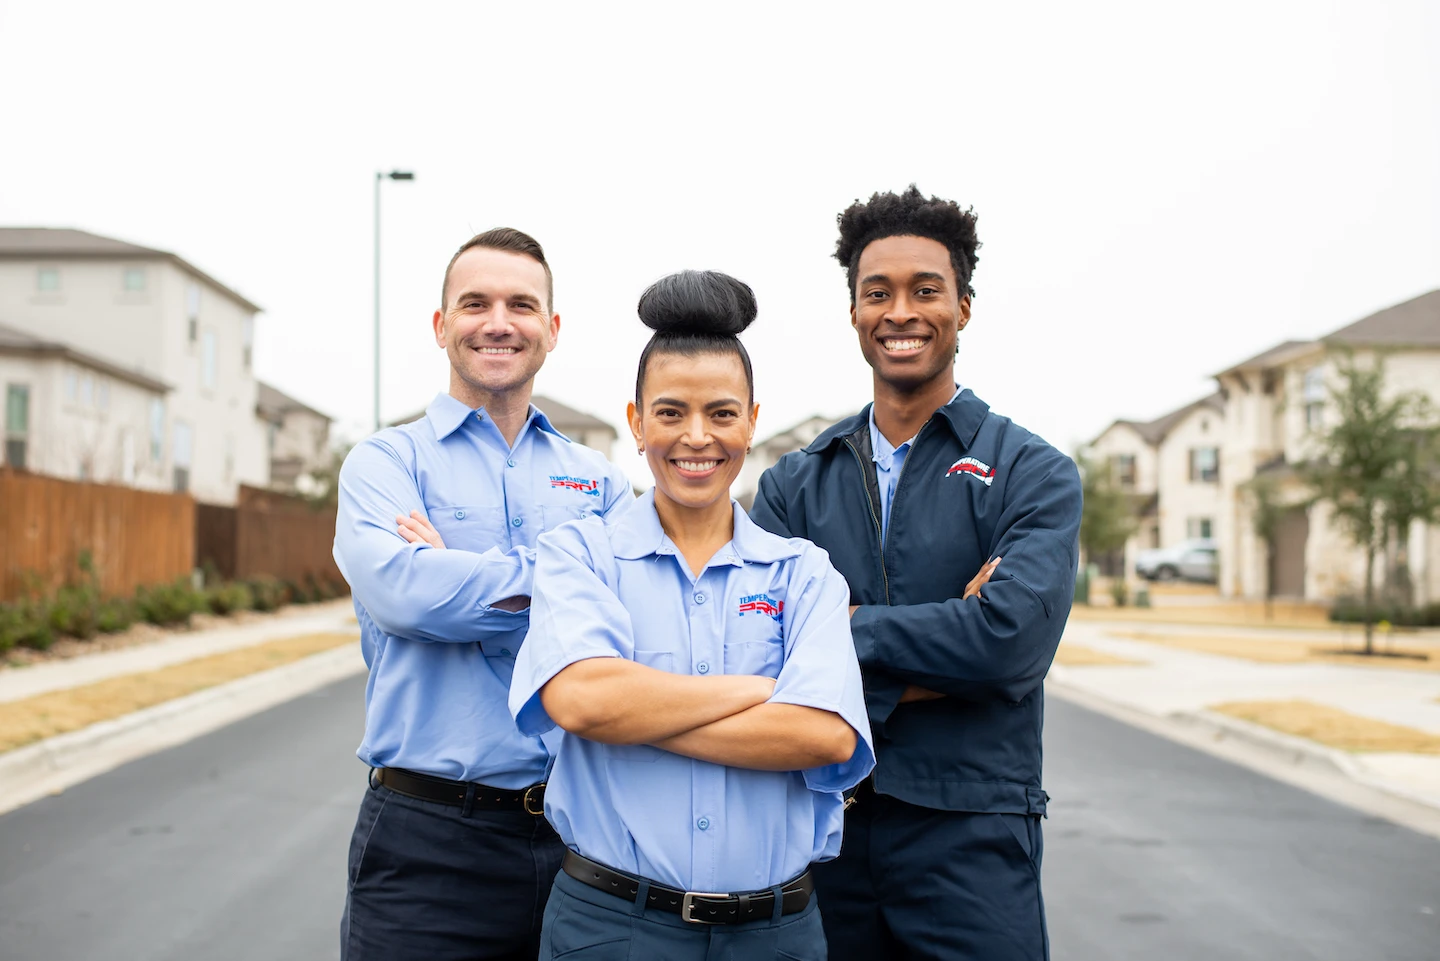 Three TemperaturePro employees smiling with arms crossed in front of a white limestone home.